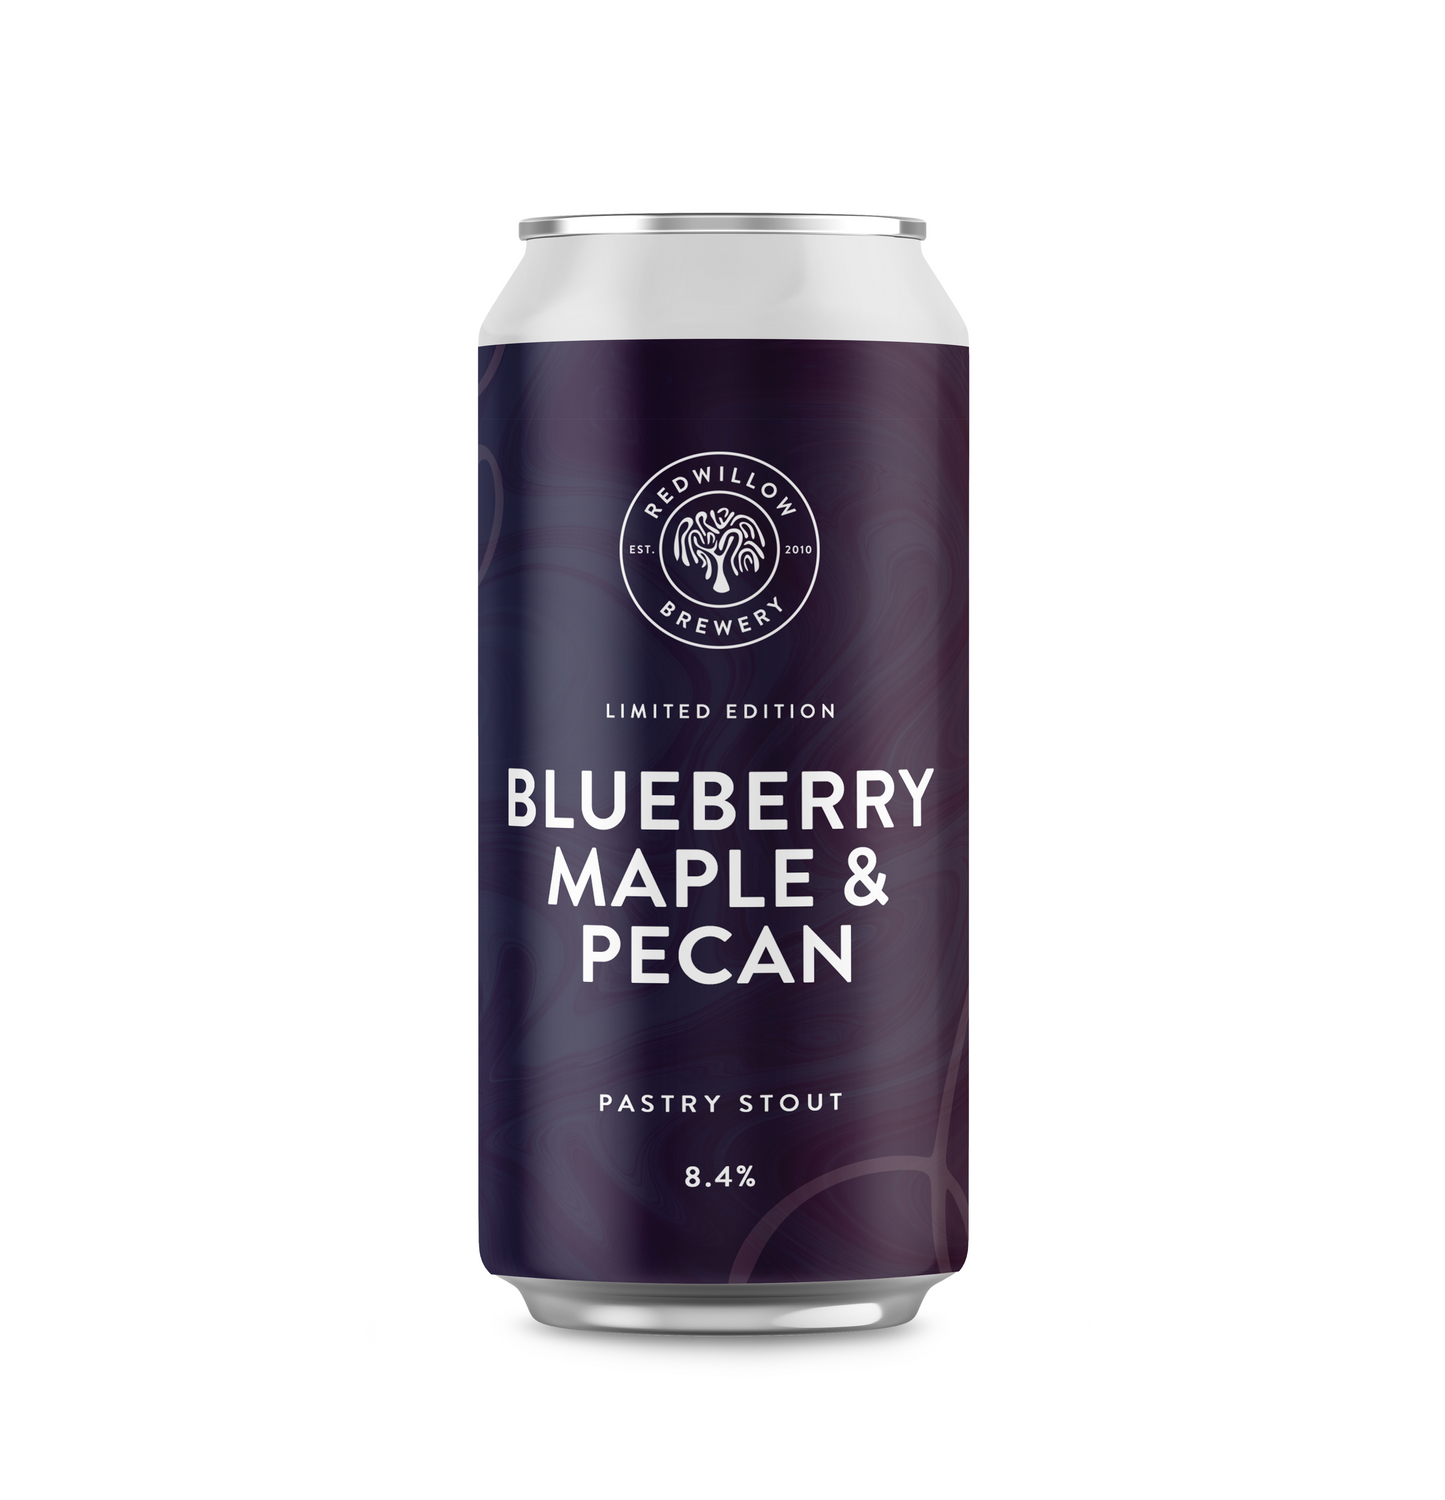 Blueberry, Maple & Pecan Pastry Stout